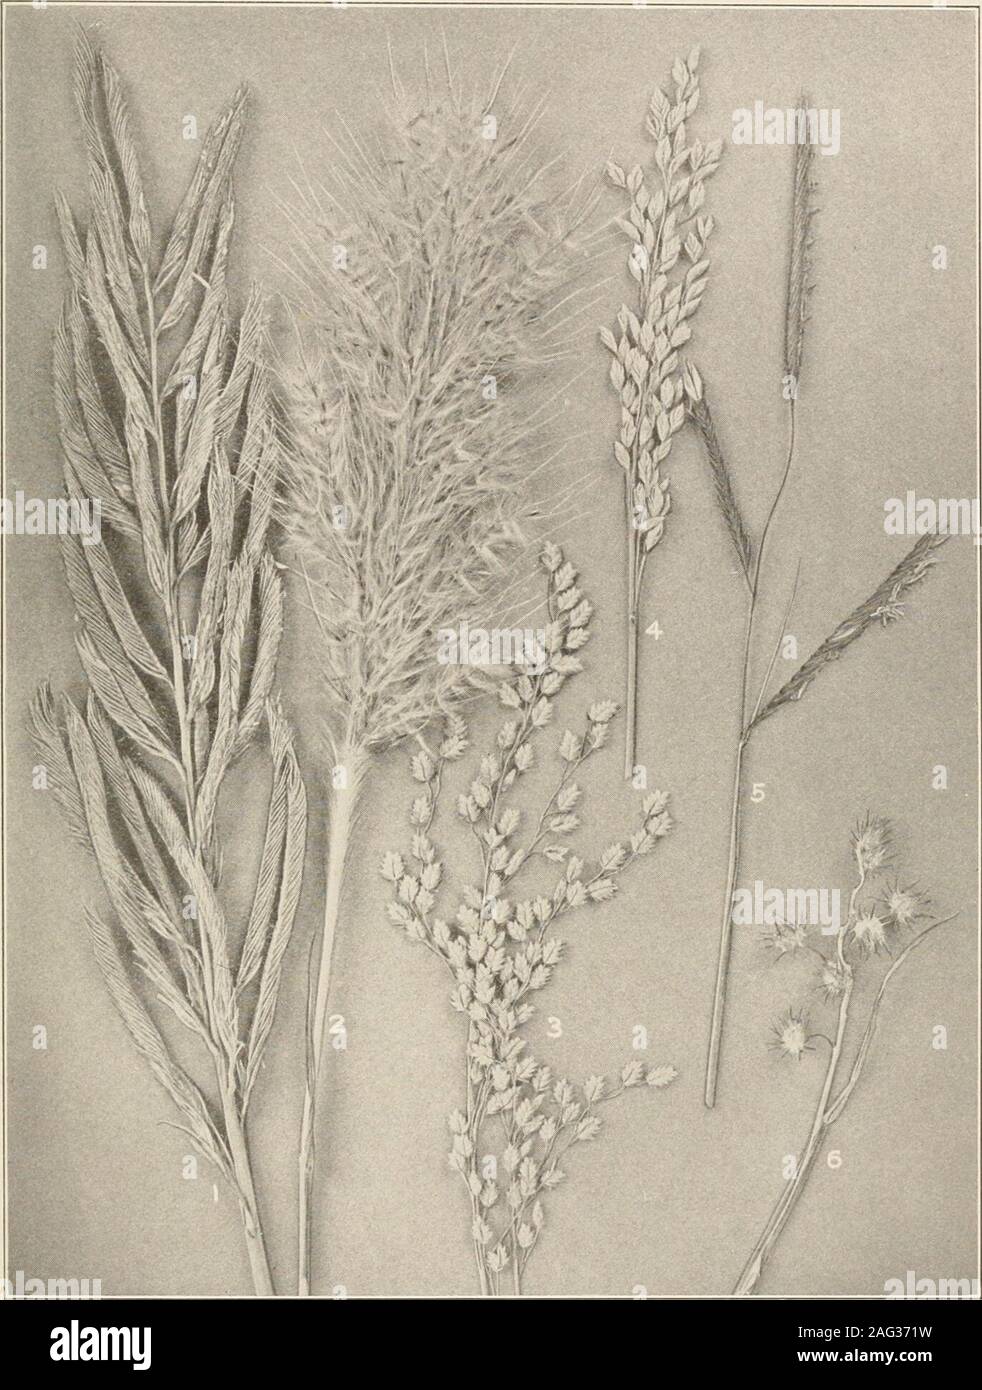 . The plants of southern New Jersey; with especial reference to the flora of the pine barrens and the geographic distribution of the species. (Jriuiual Iliod Nat. size. GRASSES. 1. Festuca octoflora. 4. S. clandestinus. 2. F. elatior. 5. Sphenopholis pallens. 3. Sporobolus vaginaeflorus. 6. Uniola laxa. N. J. Plants. PLATE XV.. Original Photo. GRASSES. 1. Spartina cynosuroides. 4. P. obtusa. 2. Erianthus saccharoides. 5. Spartina patens. 3. Panicularia canadensis. 6. Cenchrus carolinensis. X.6. N. J. Plants. PLATE XVI. Stock Photo